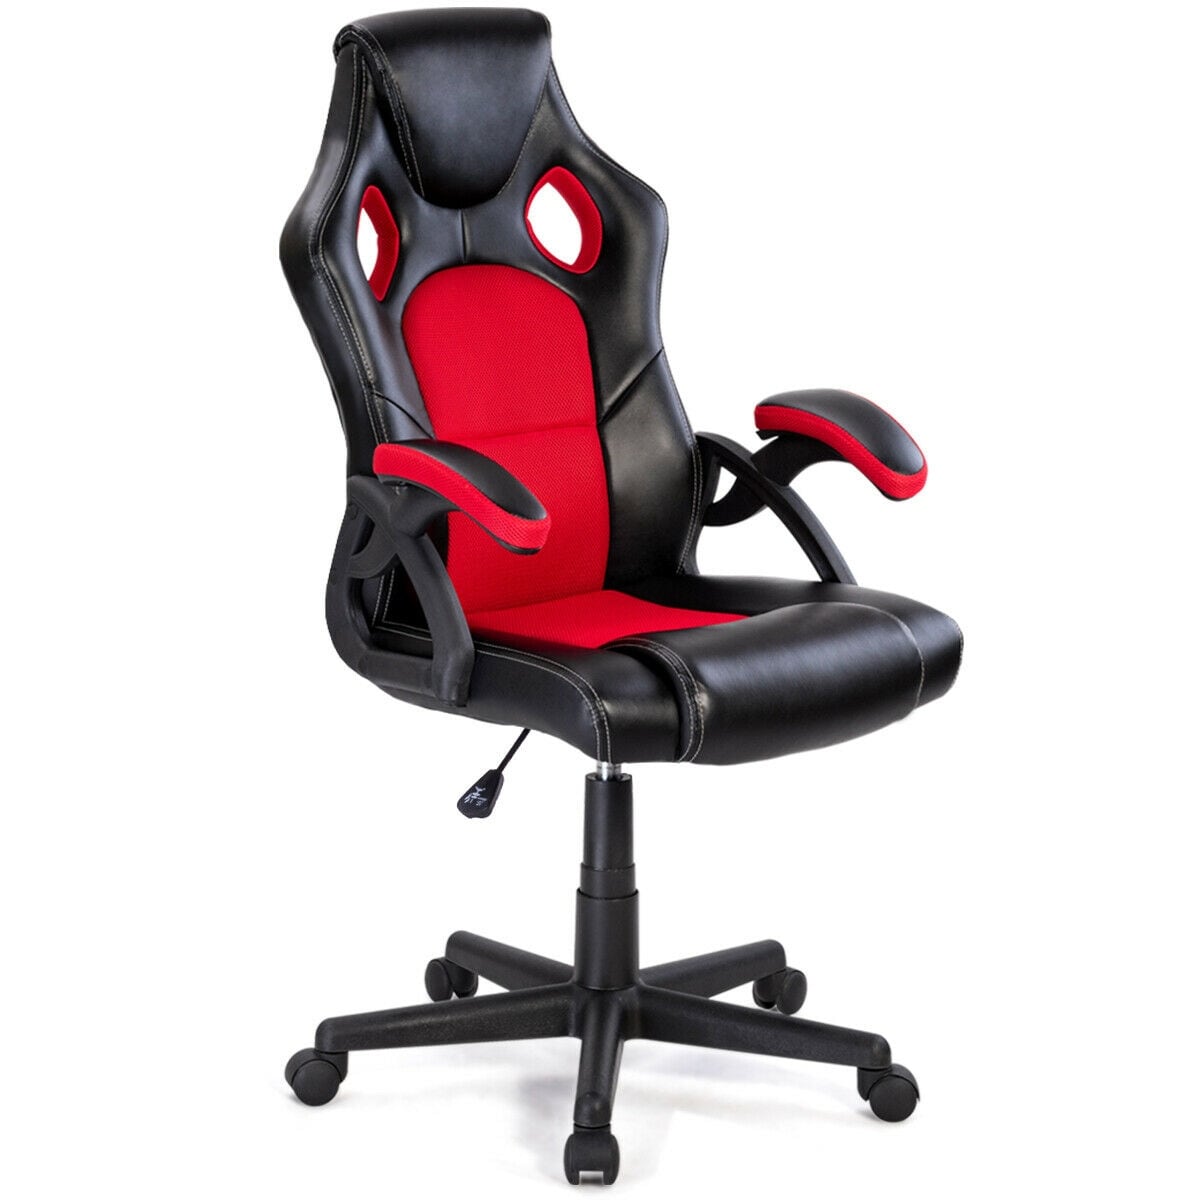 https://ak1.ostkcdn.com/images/products/is/images/direct/5bb4997df731ce893bf78f6949b36bb3e563b4aa/Costway-PU-Leather-Executive-Bucket-Seat-Racing-Style-Office-Chair-Computer-Desk-Task.jpg